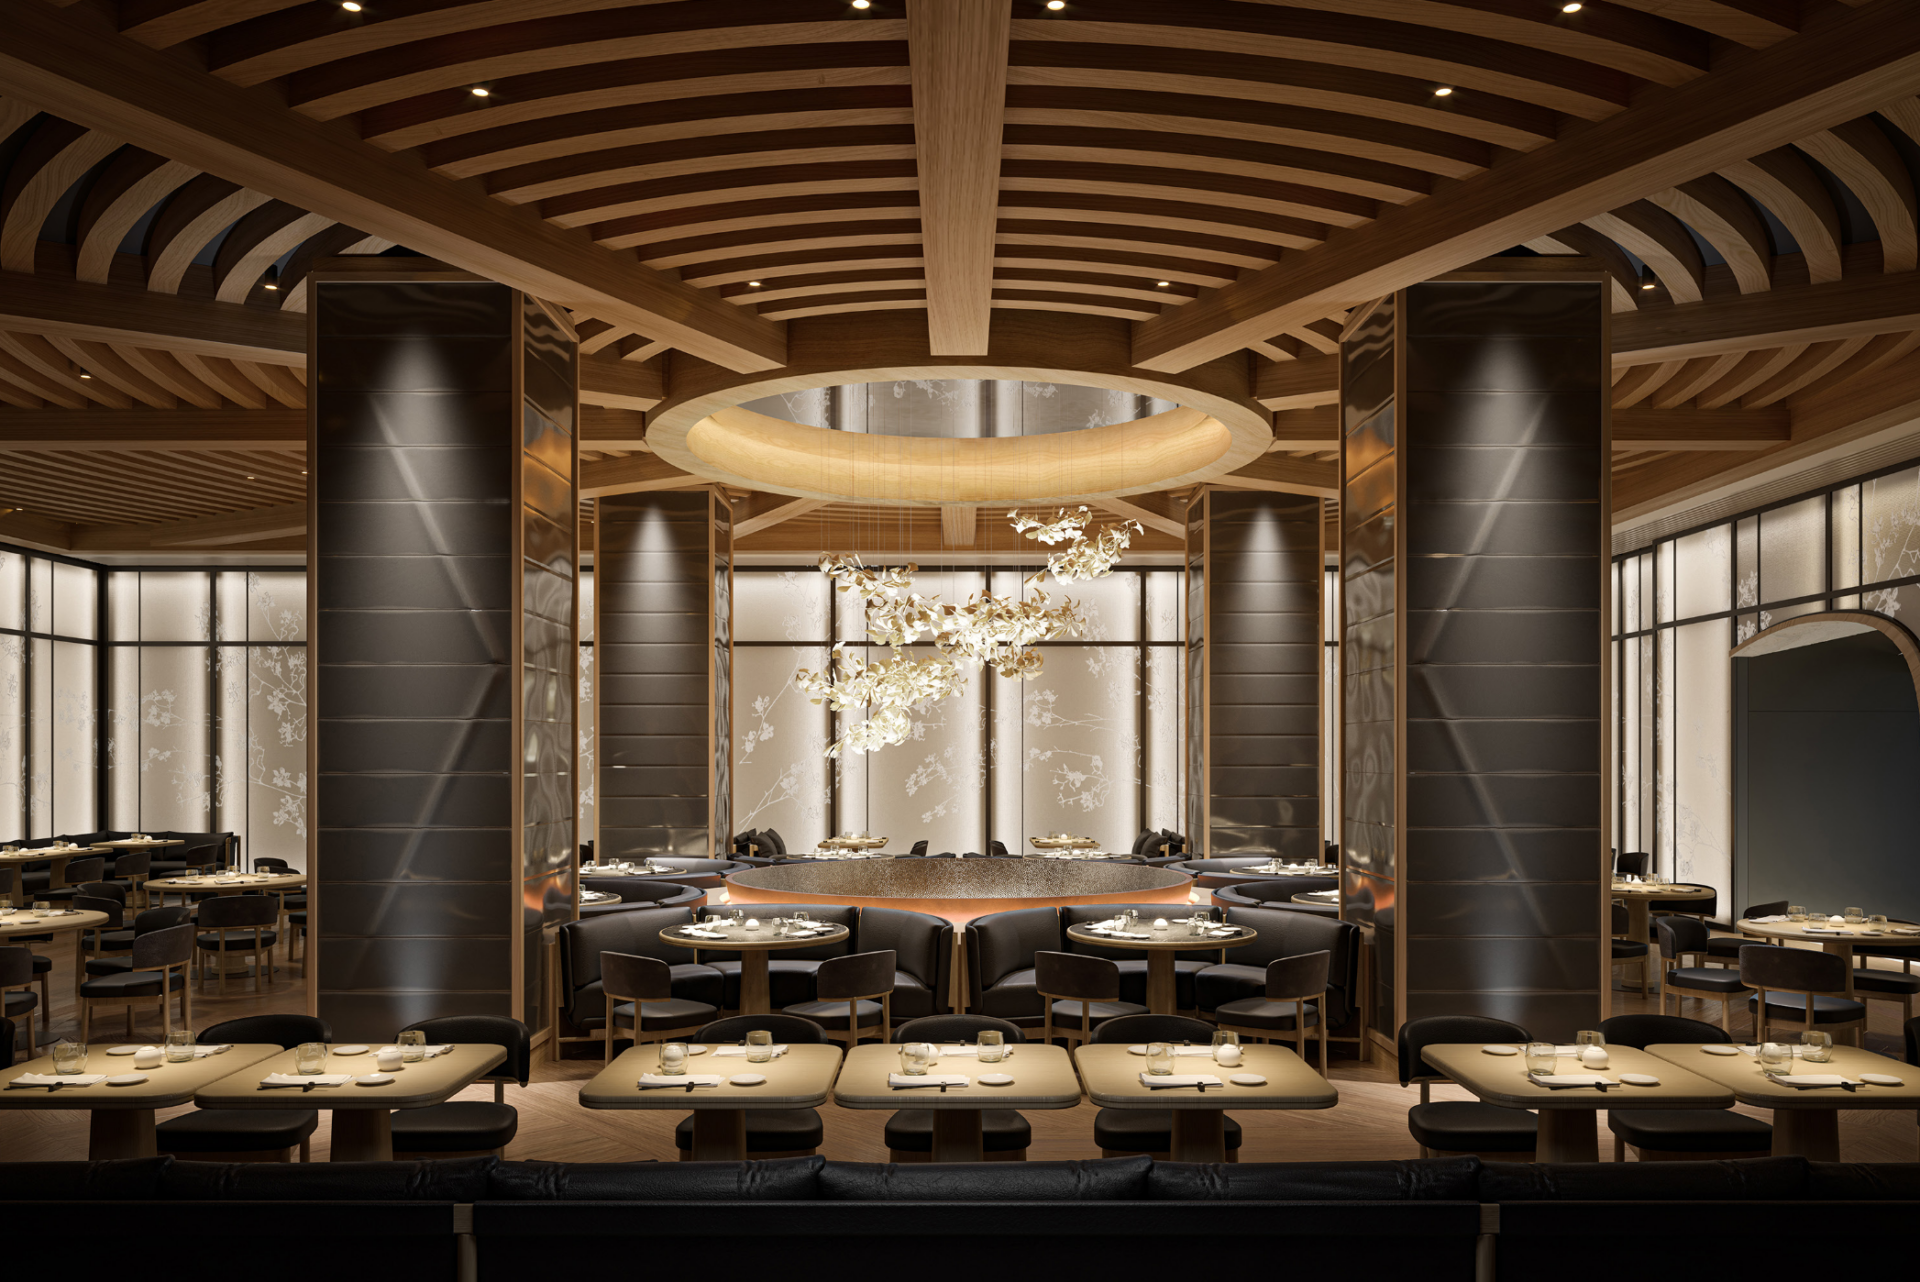 ribbed ceiling leading to a central circular dome above restaurant tables in Nobu Toronto